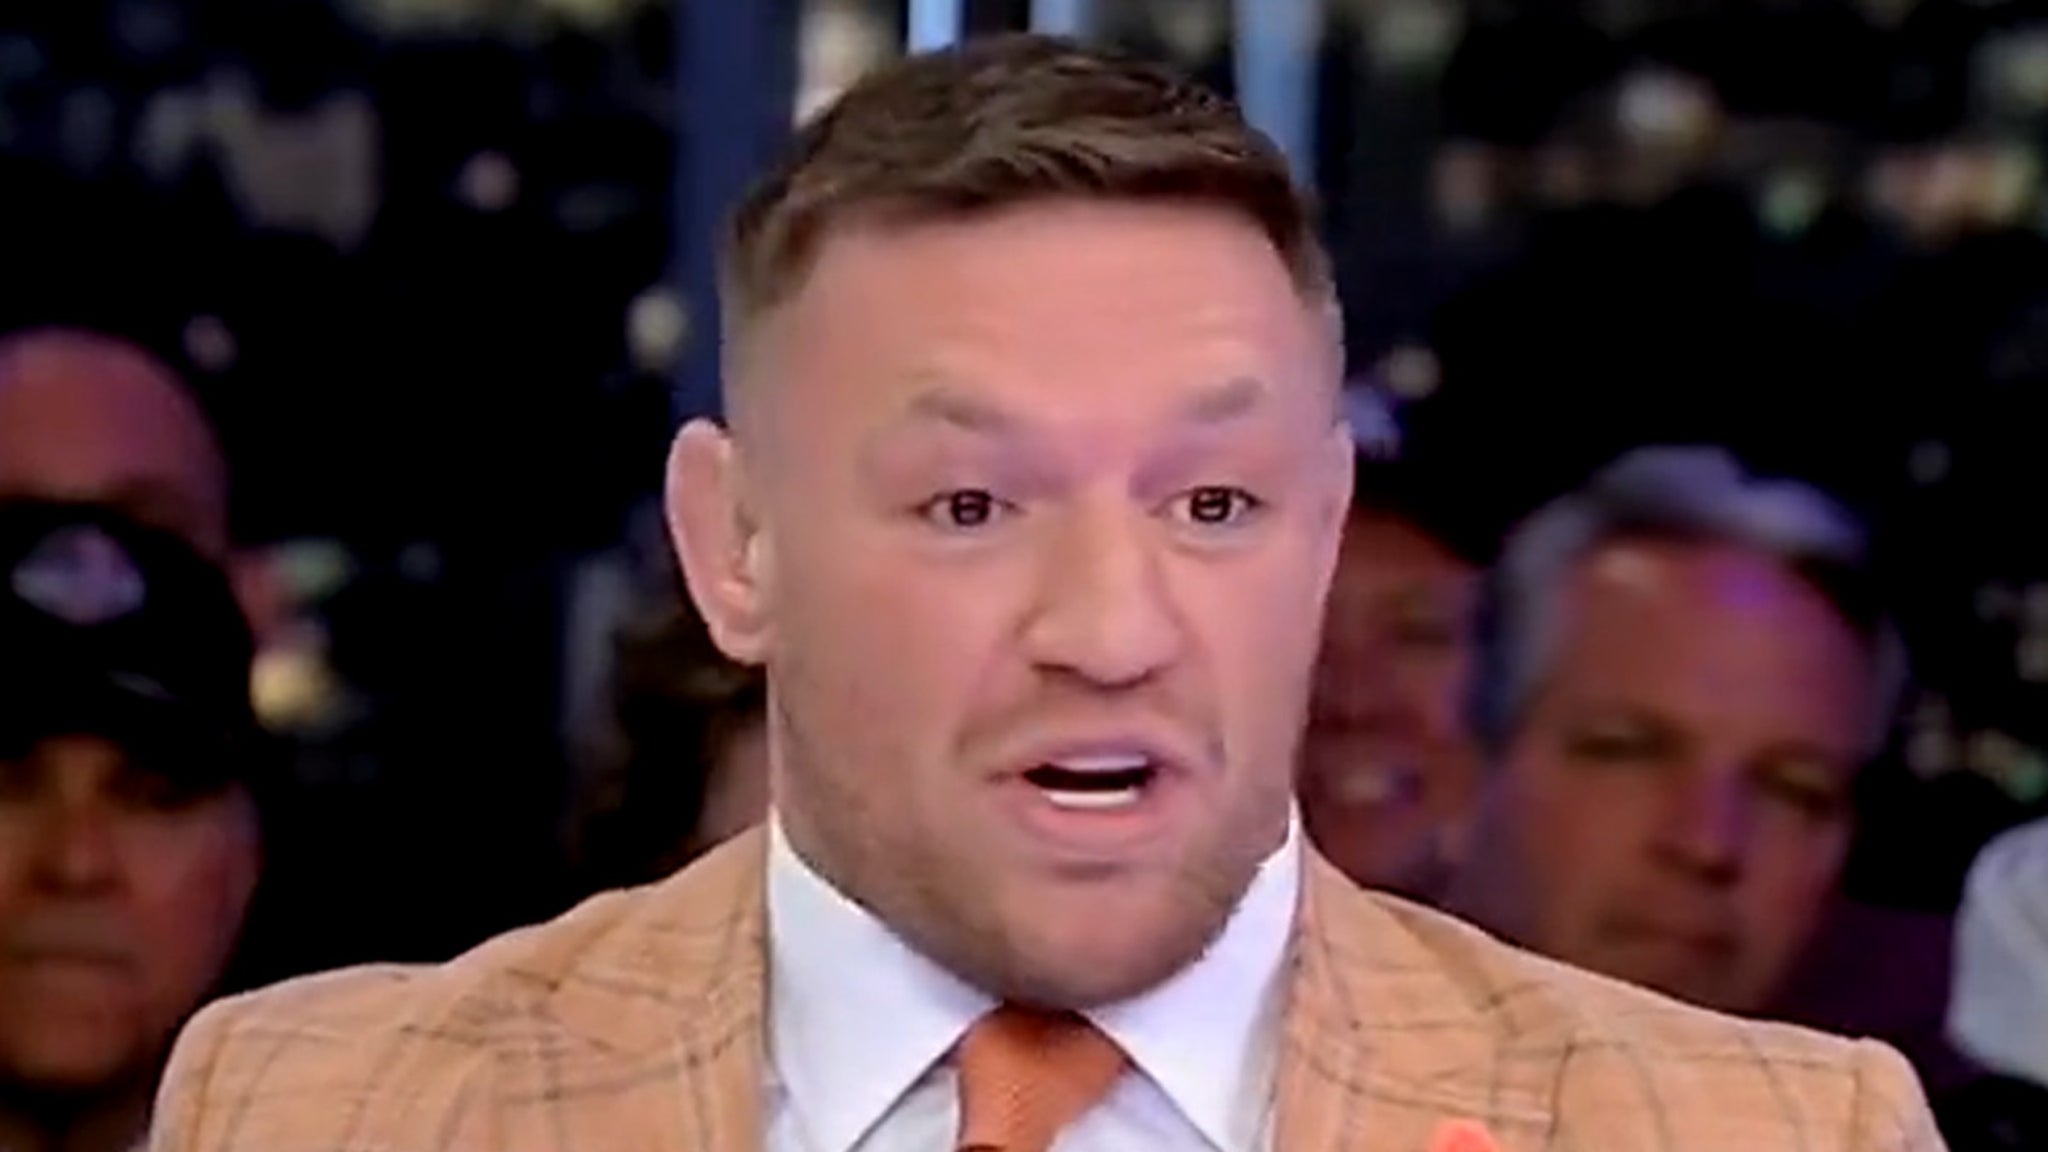 Conor McGregor Let F-Bomb Live on Fox News Ahead of Revealing $1 Million Donation